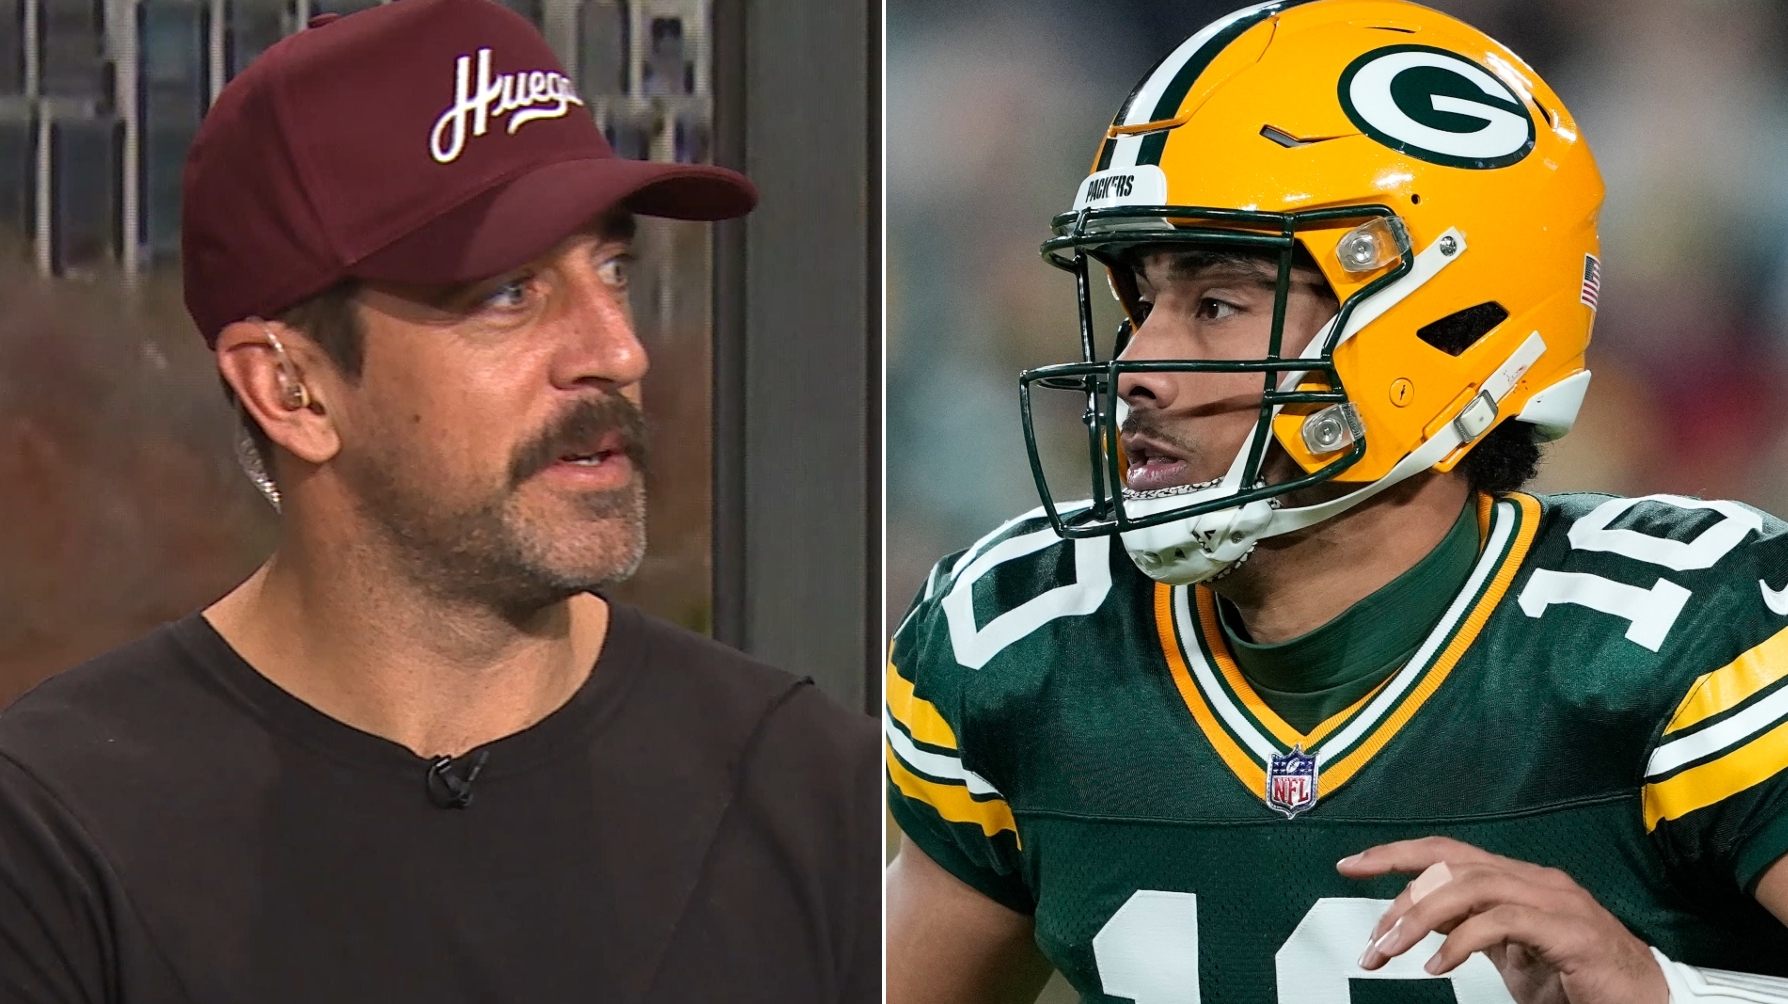 Rodgers tells McAfee he's loving what he's seeing from Jordan Love